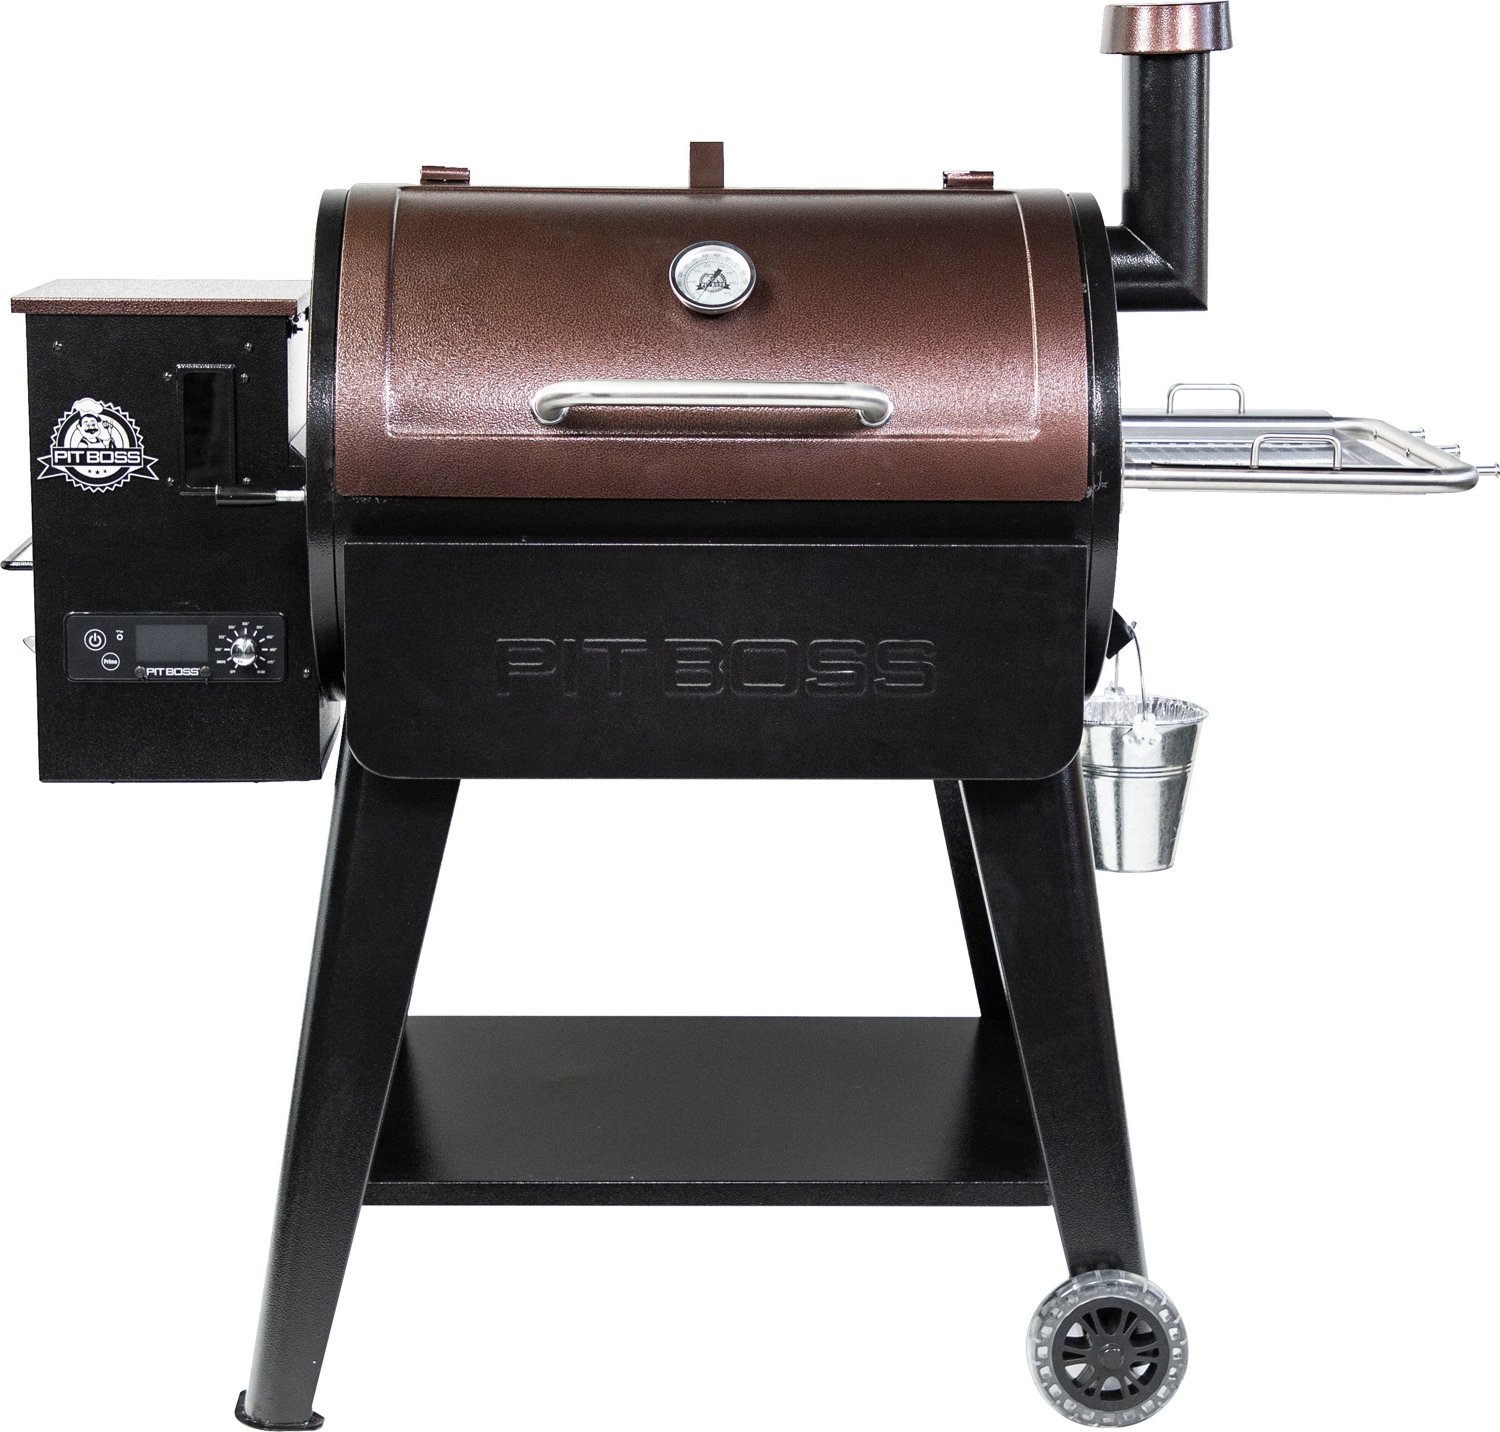 Grills - Up to $100 Off | Academy